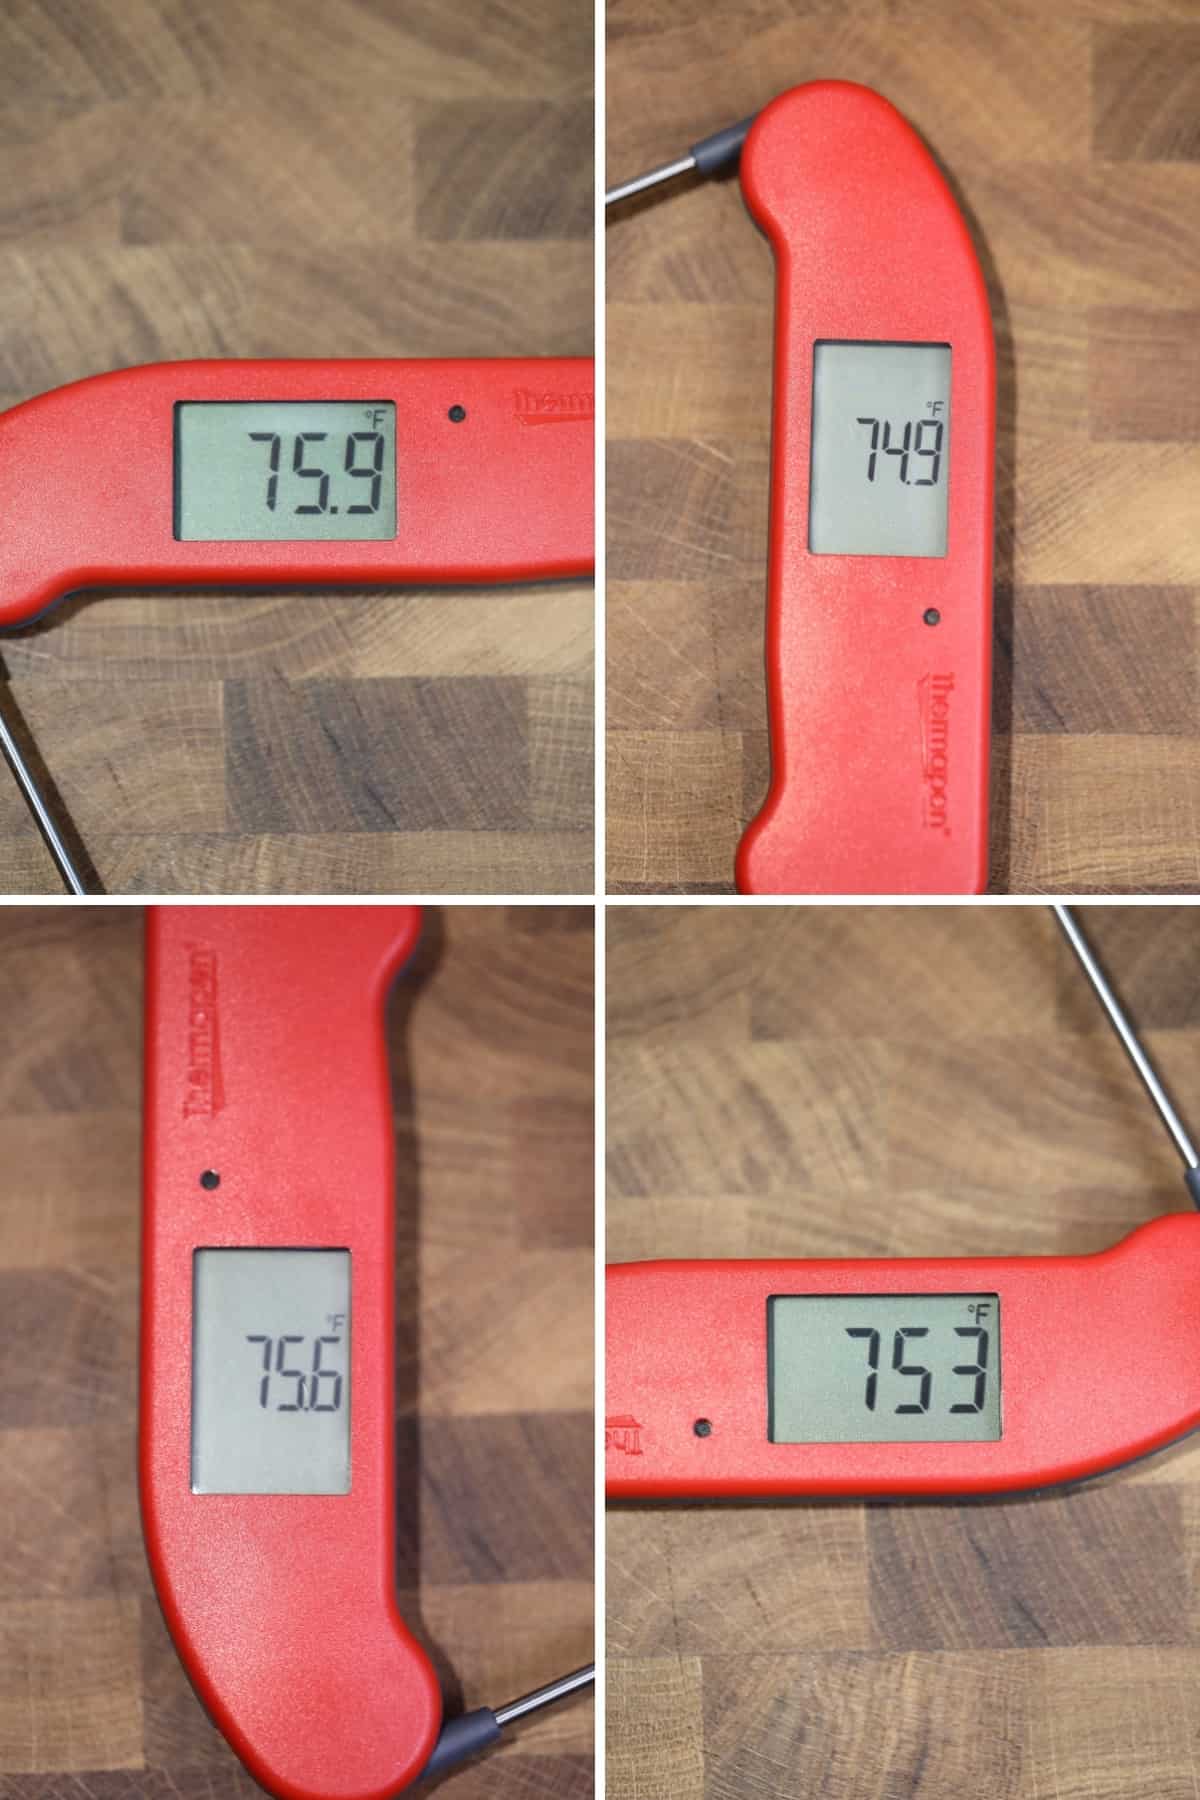 Four photos of the Thermapen One rotated 90 degrees in each, to show the auto-rotating display